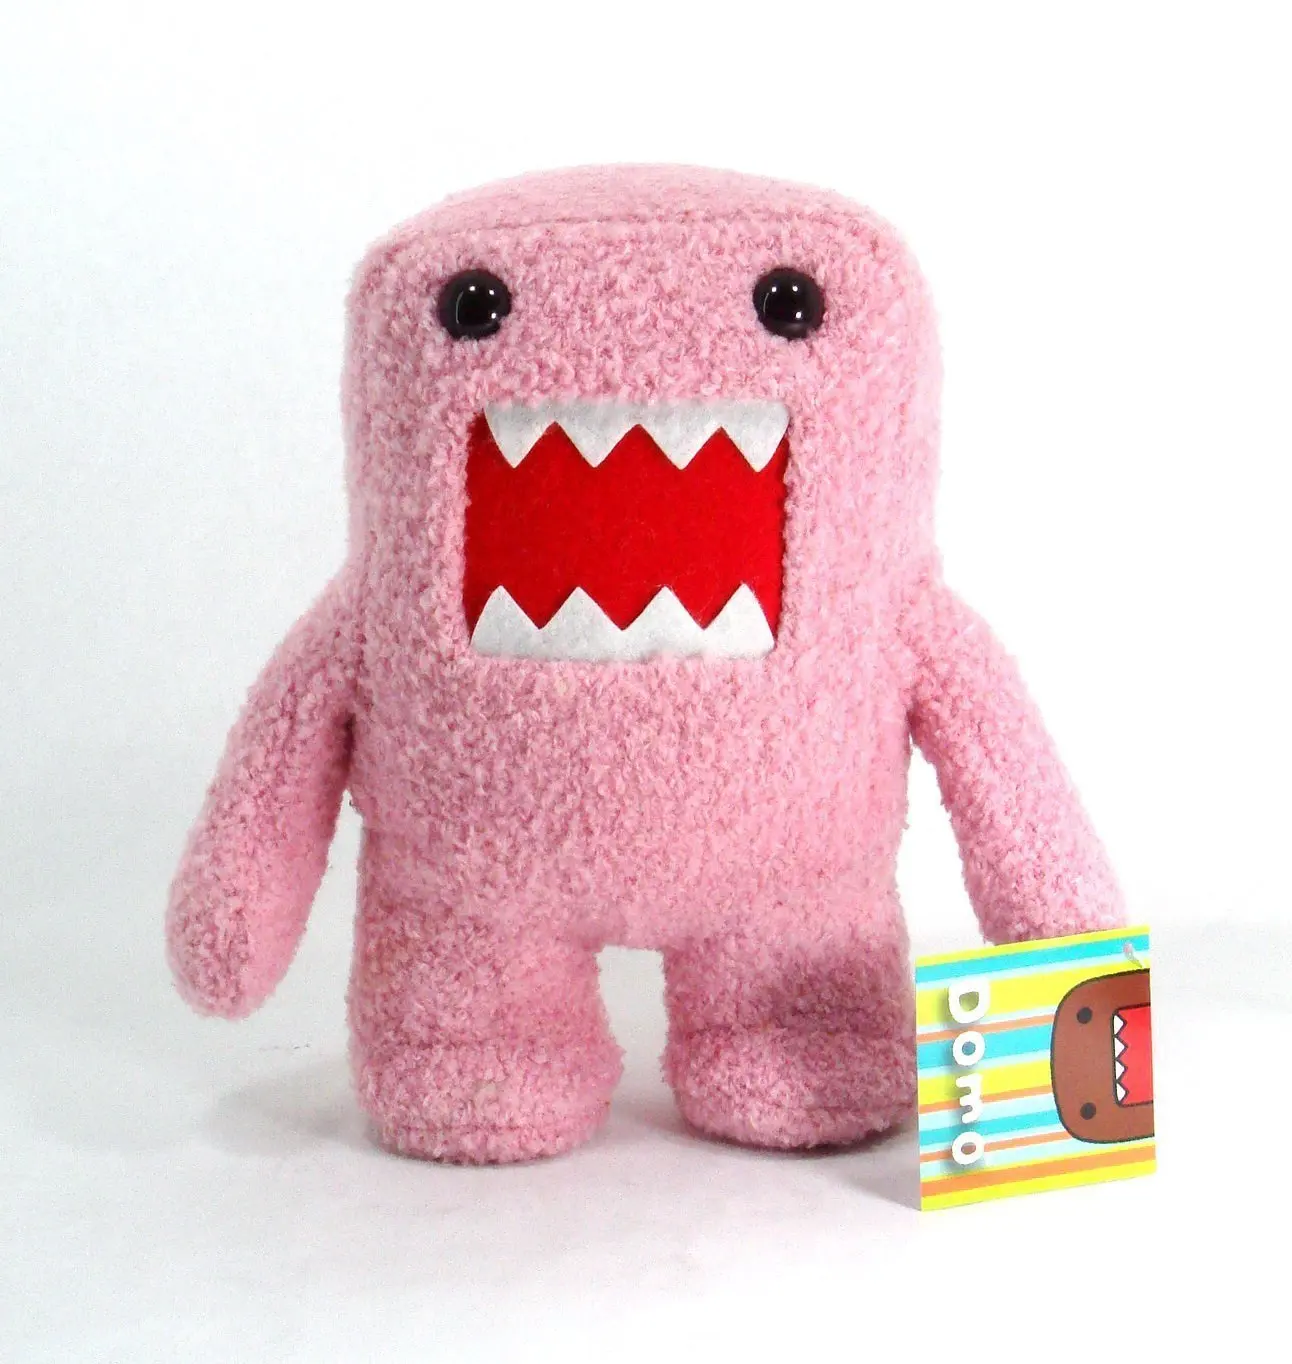 Cheap pink domo plush, find pink domo plush deals on line at Alibaba.com.